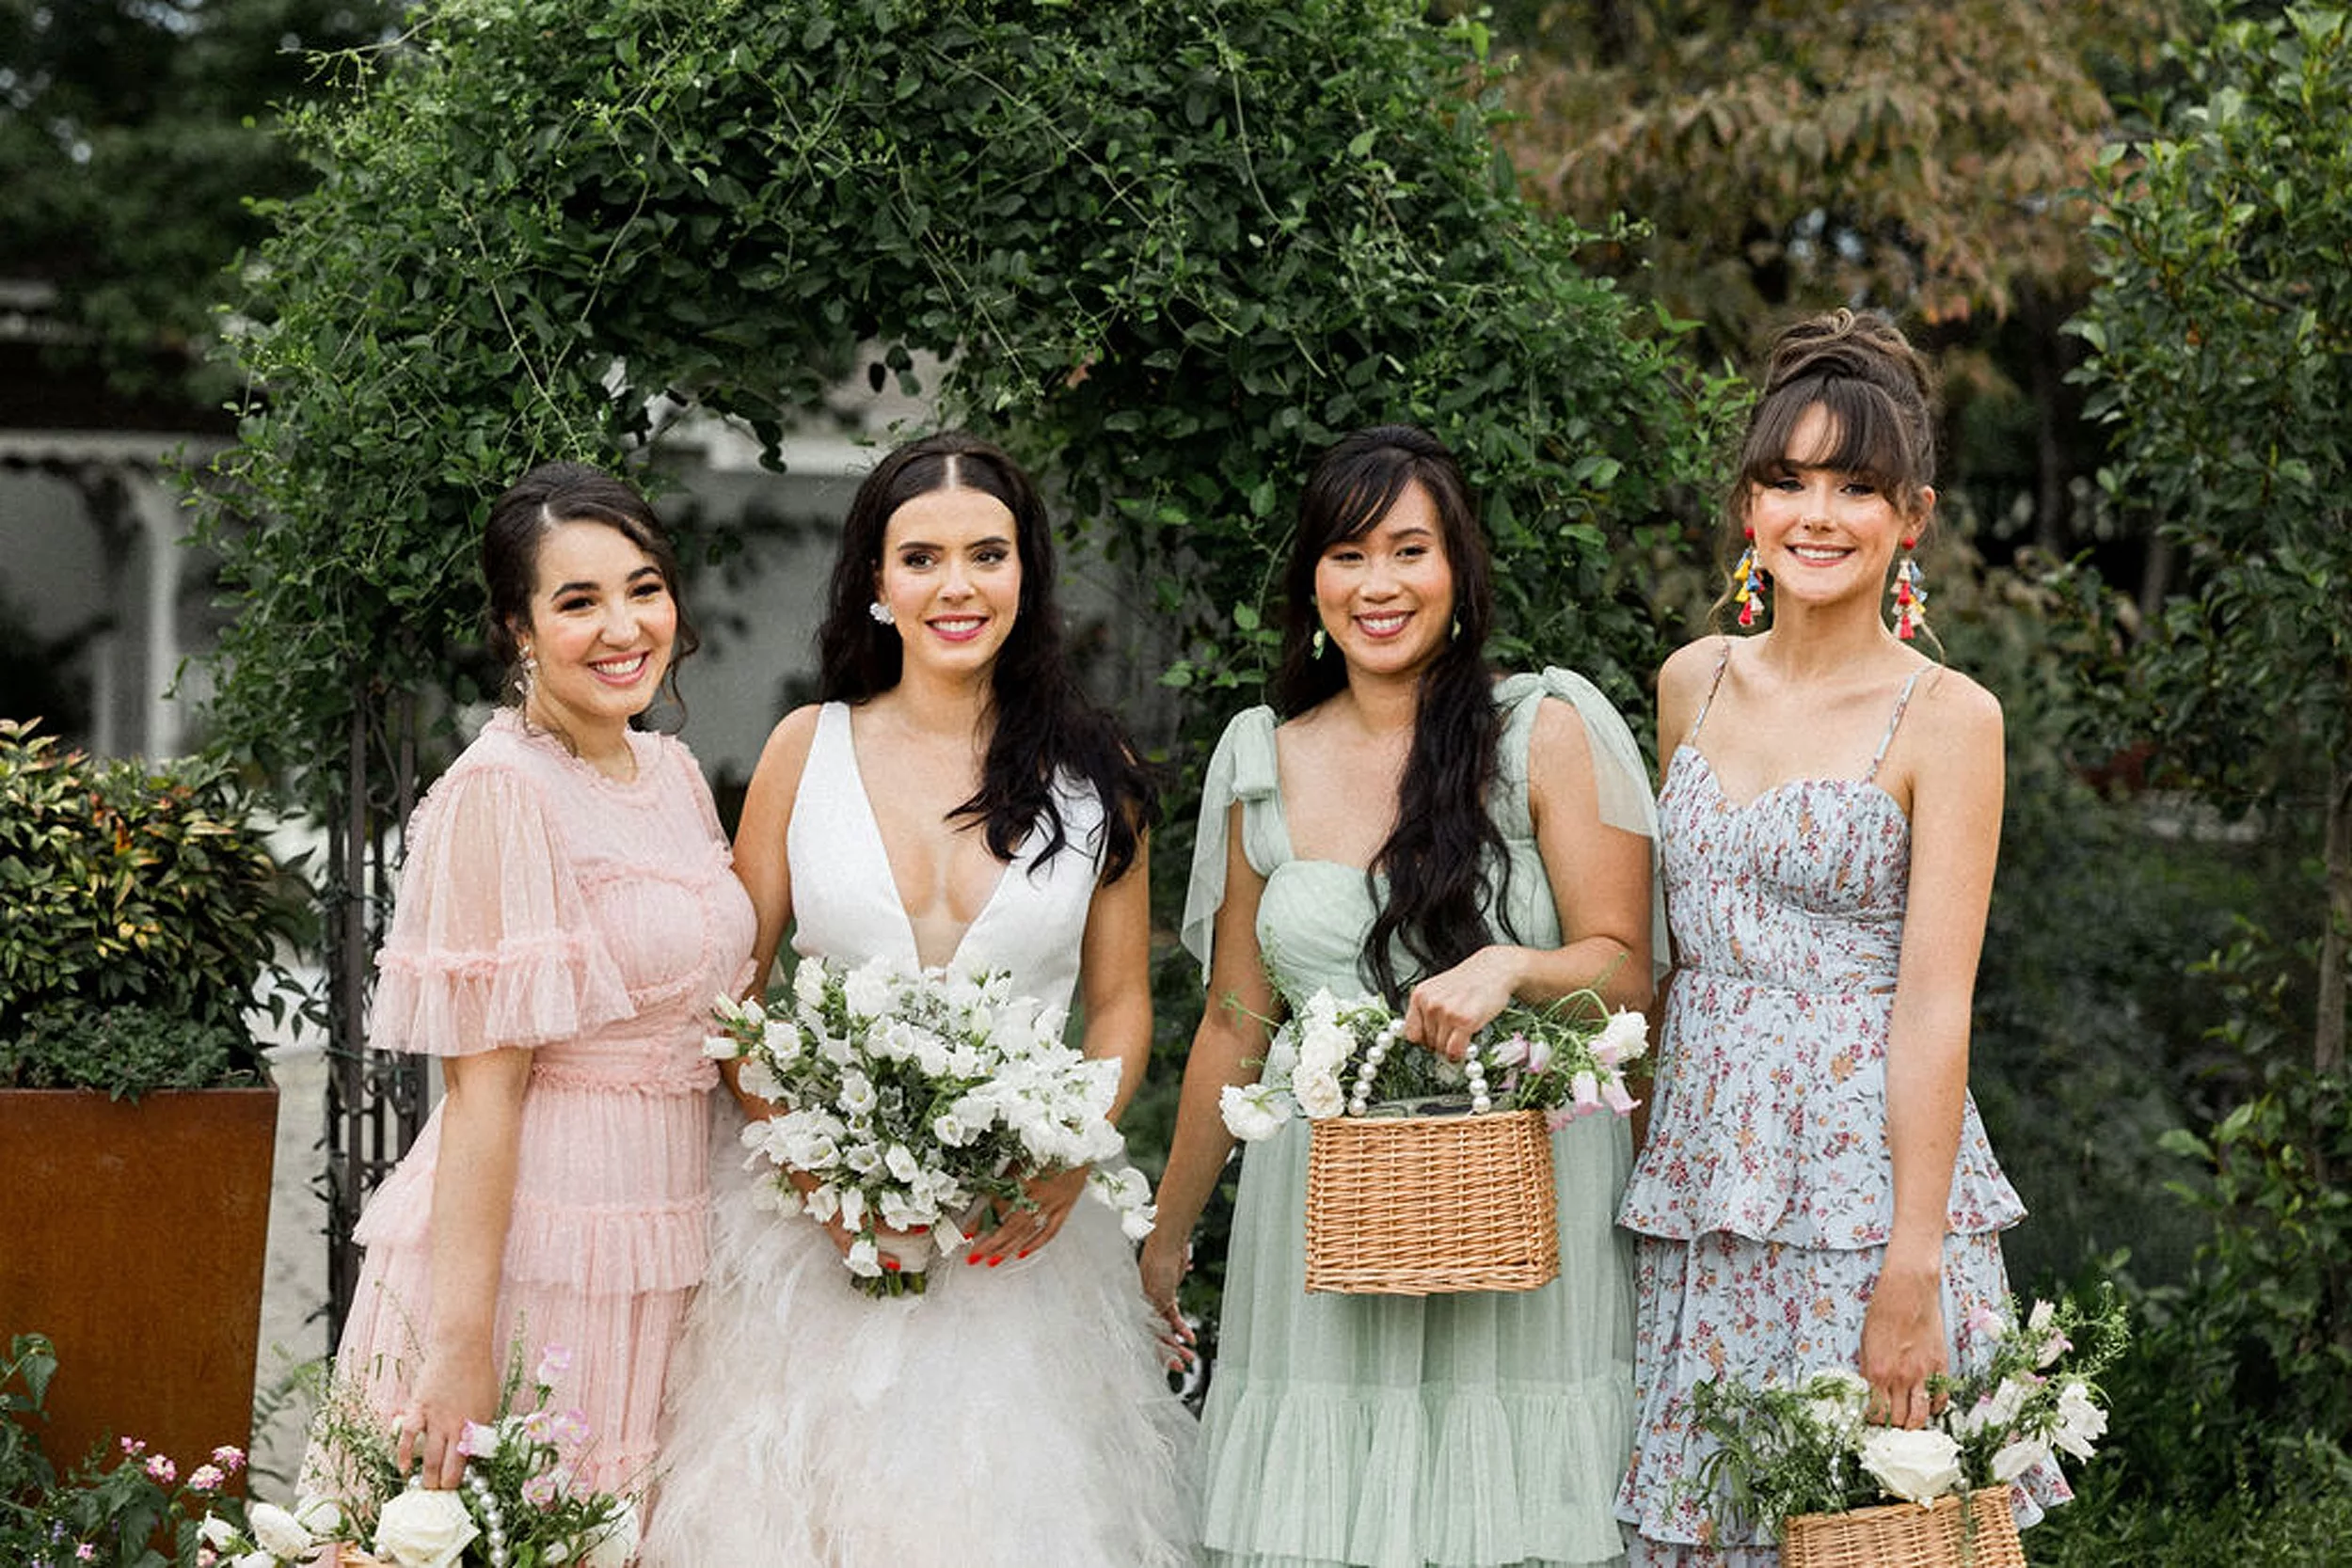 A bride stands with her bridesmaids holding wicker and pearl bouquet baskets